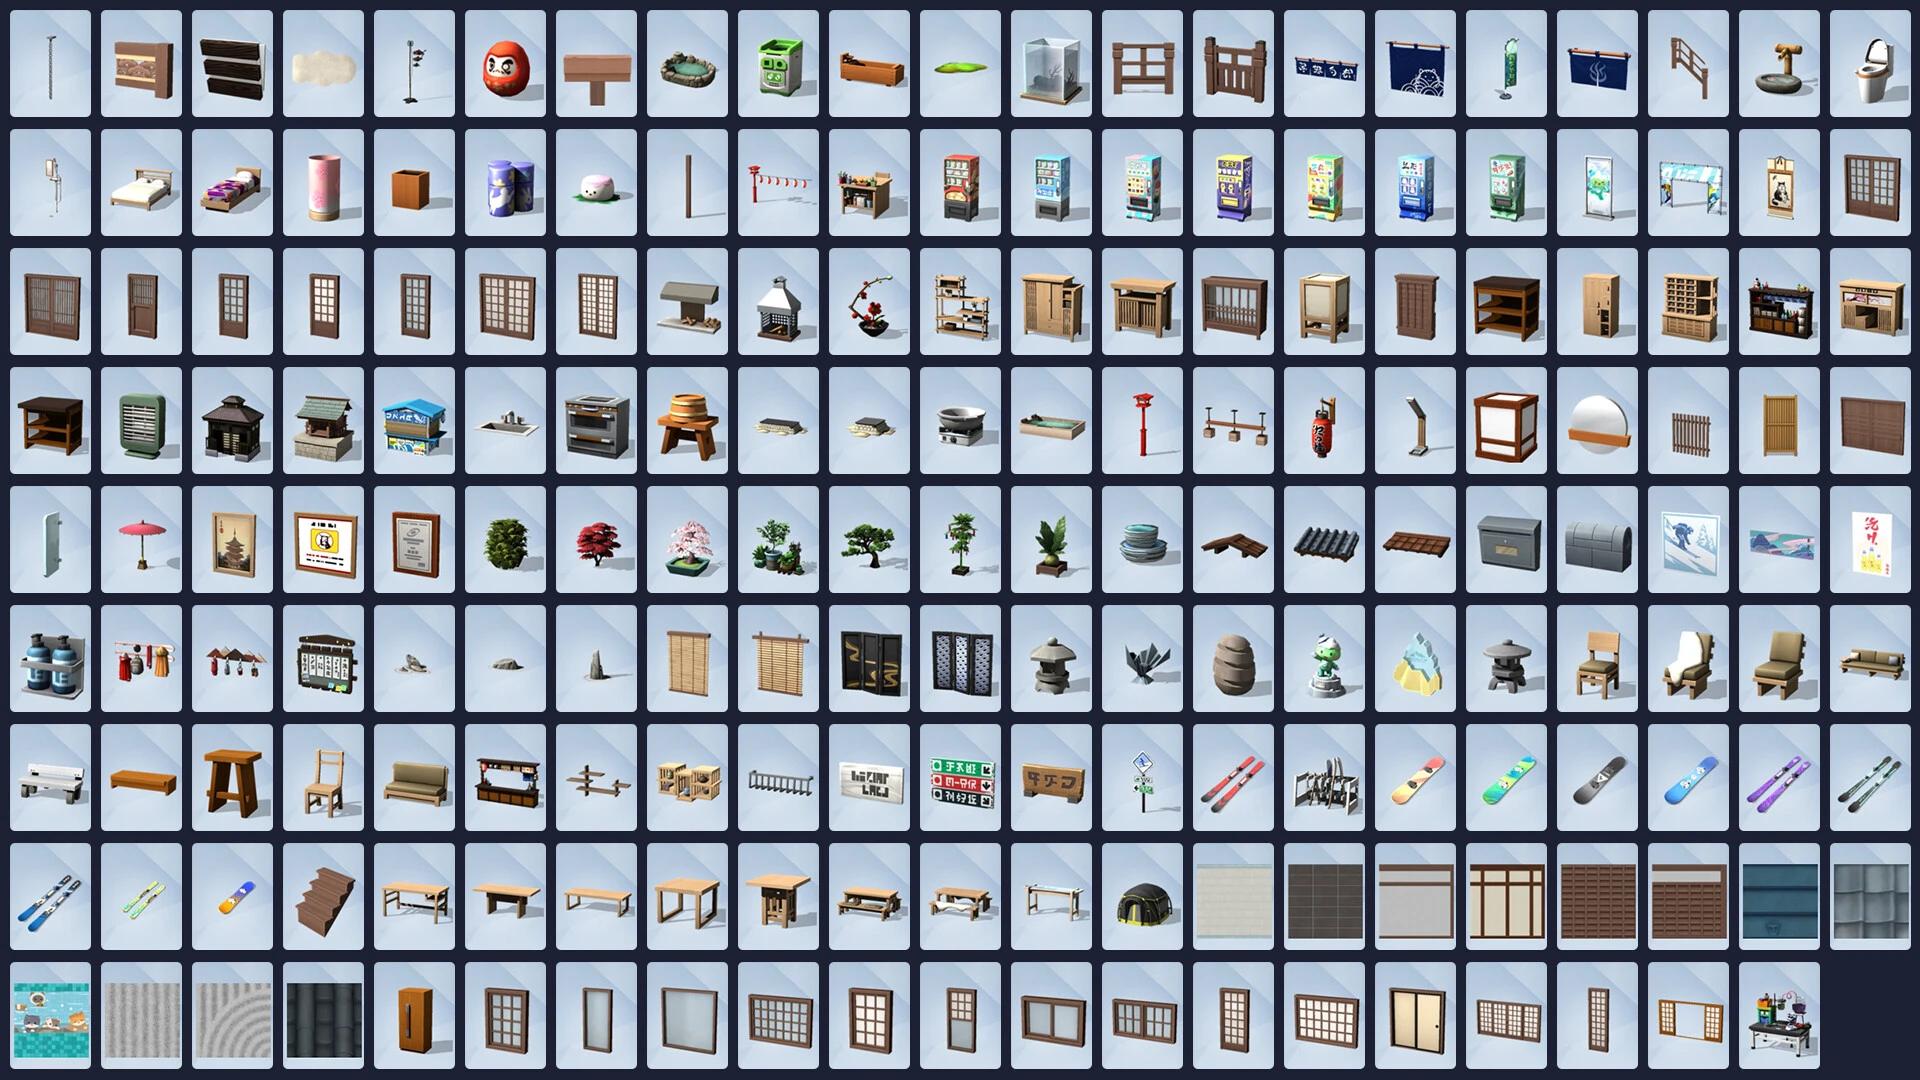 https://media.imgcdn.org/repo/2023/05/the-sims-4-snowy-escape-expansion-pack/646f2f1aab5bb-the-sims-4-snowy-escape-expansion-pack-screenshot1.webp